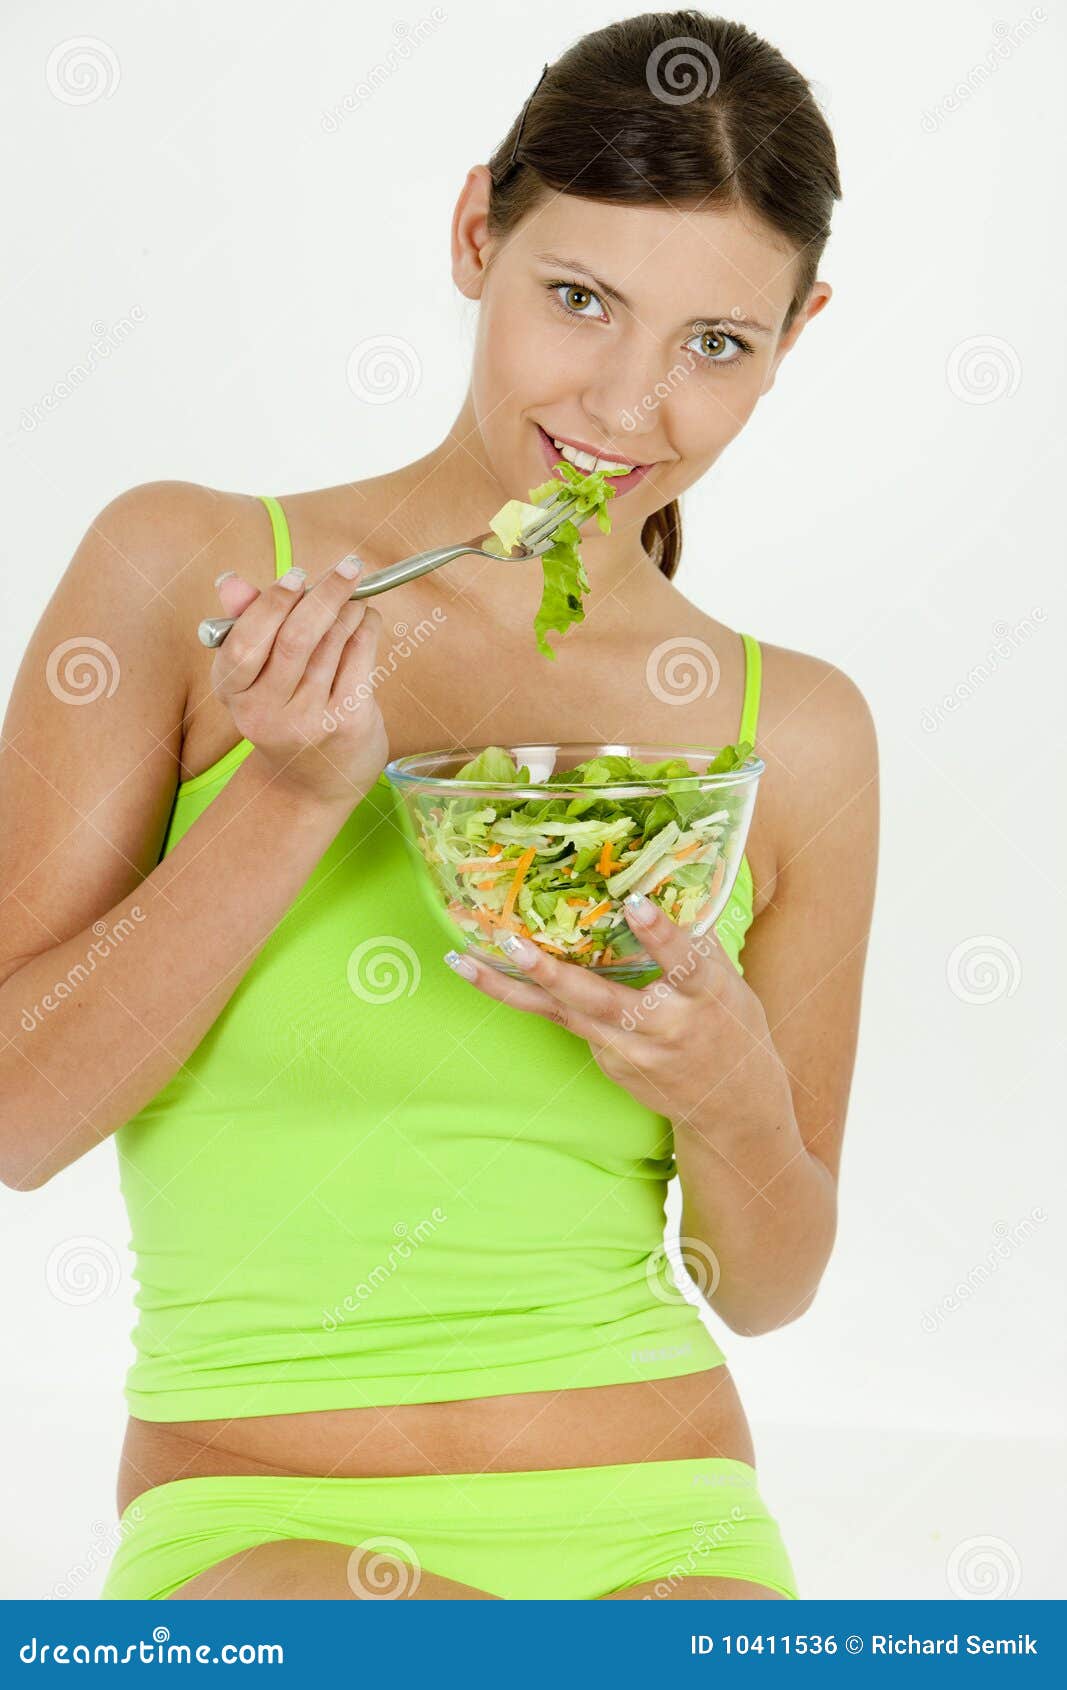 women laughing alone with salad